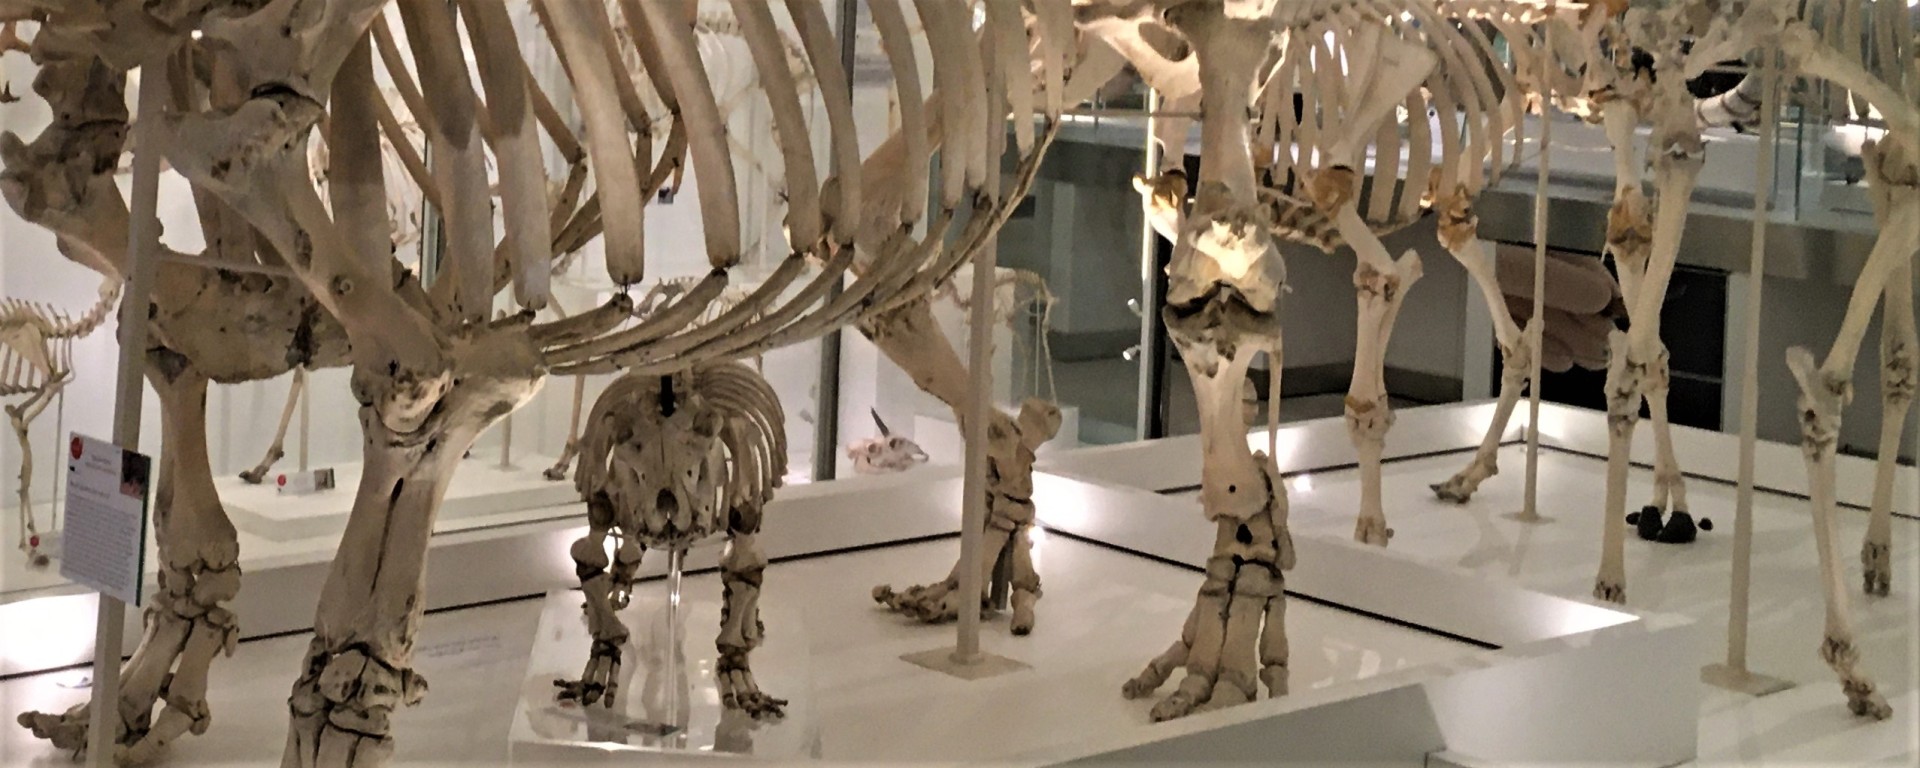 Legs of skeletons of hippo and other large herbivorous mammals, with a hippo calf skeleton